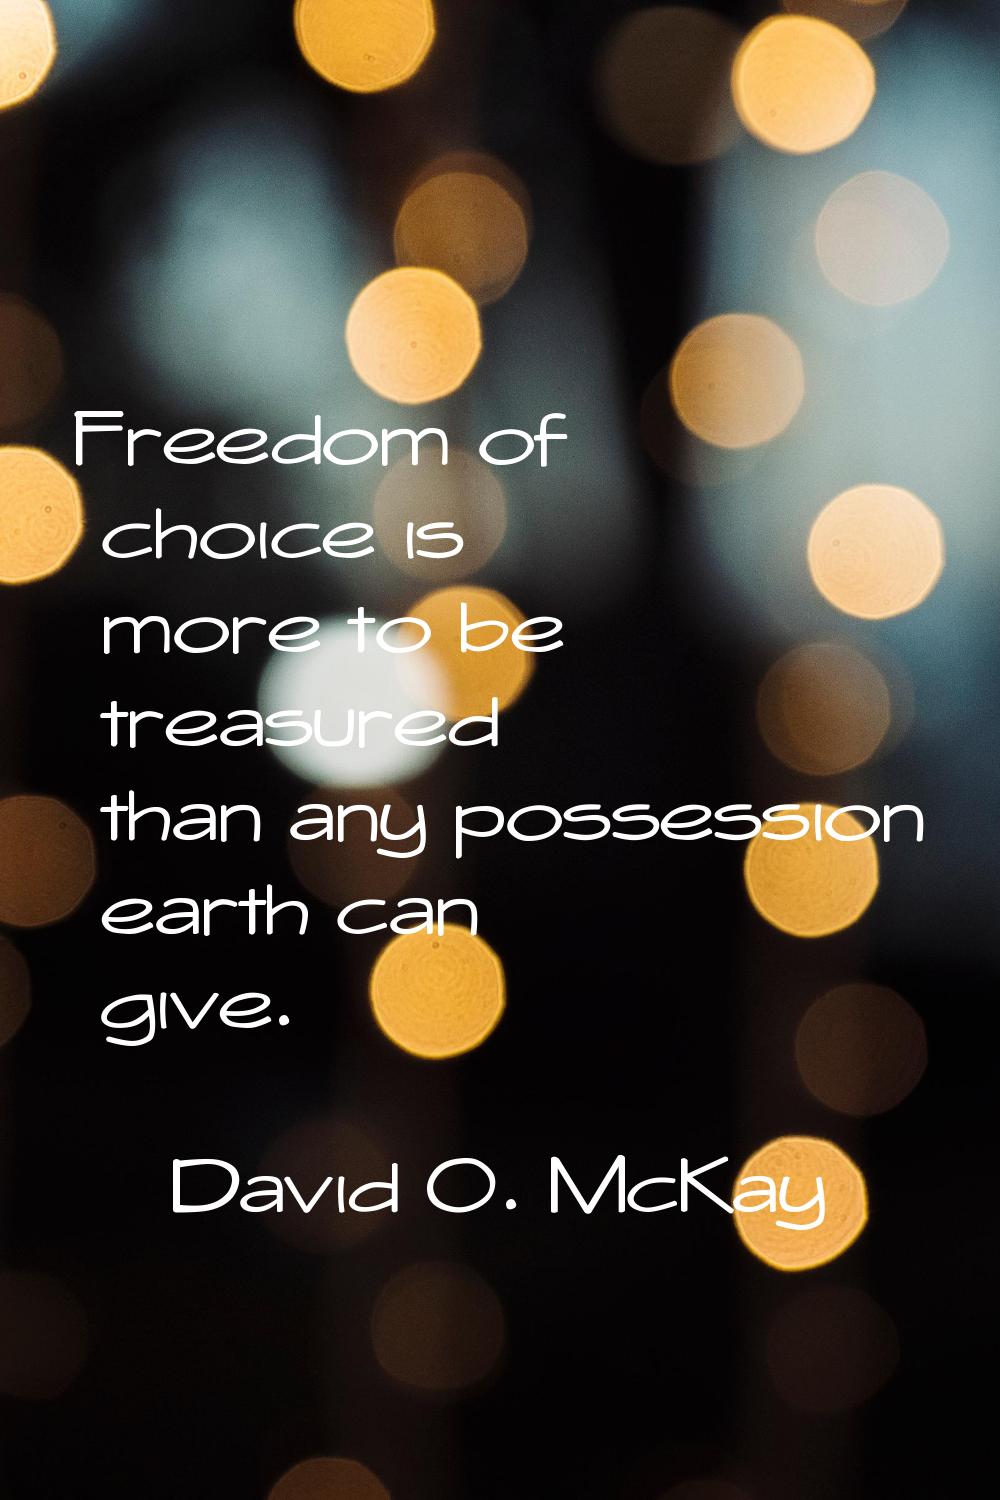 Freedom of choice is more to be treasured than any possession earth can give.